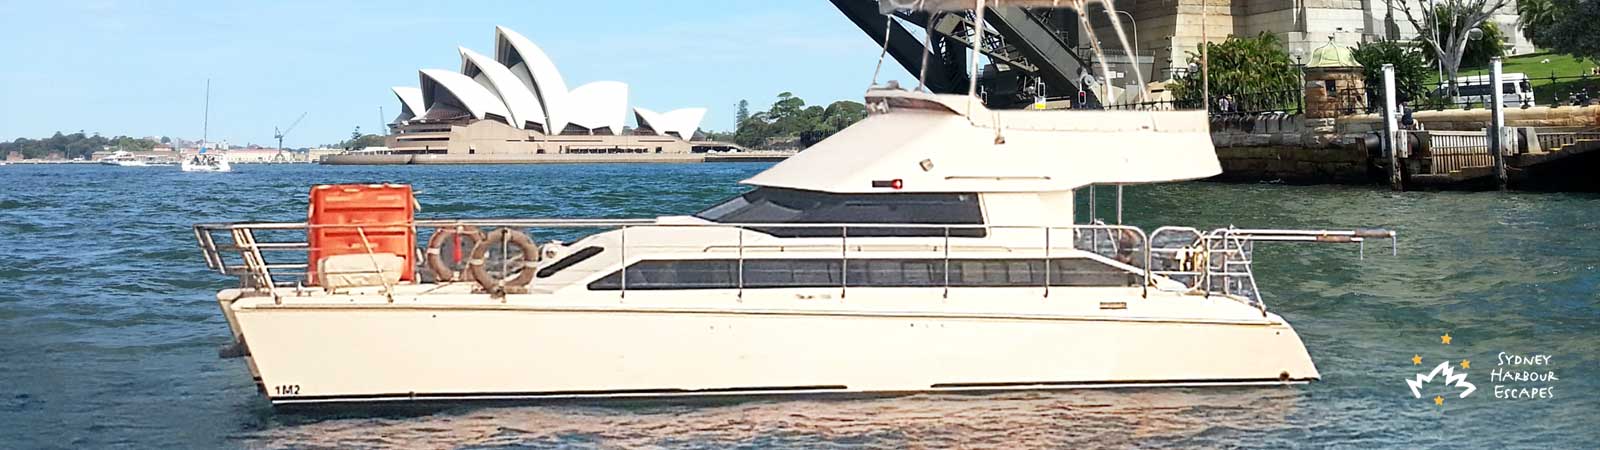 You'll be on Cloud 9 - The perfect way to see Sydney Harbour